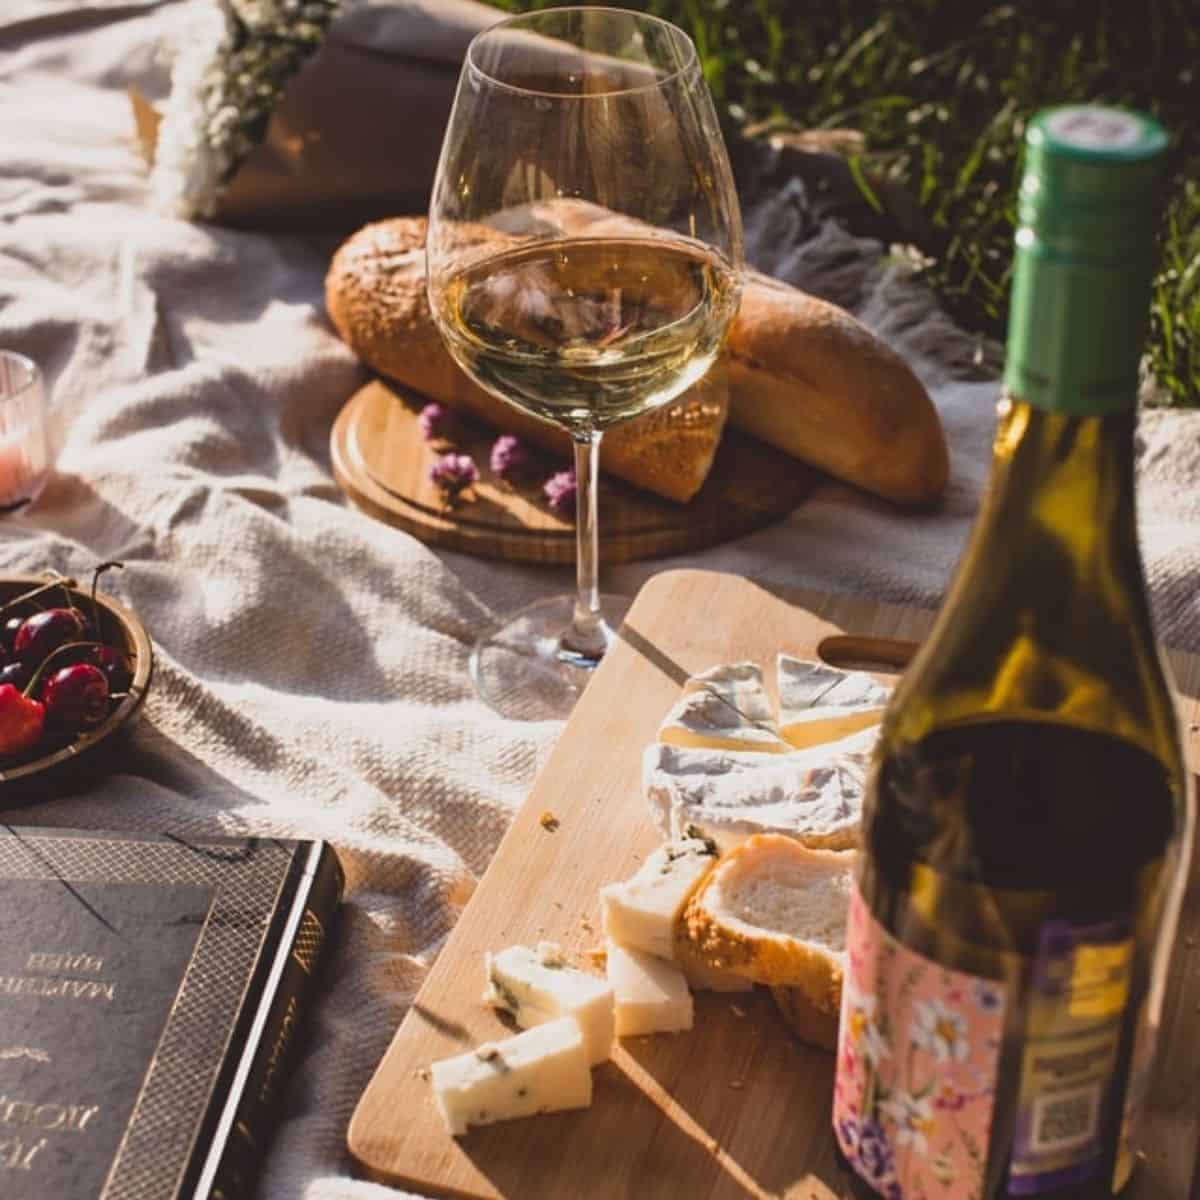 Serve cheese and snacks with your wine